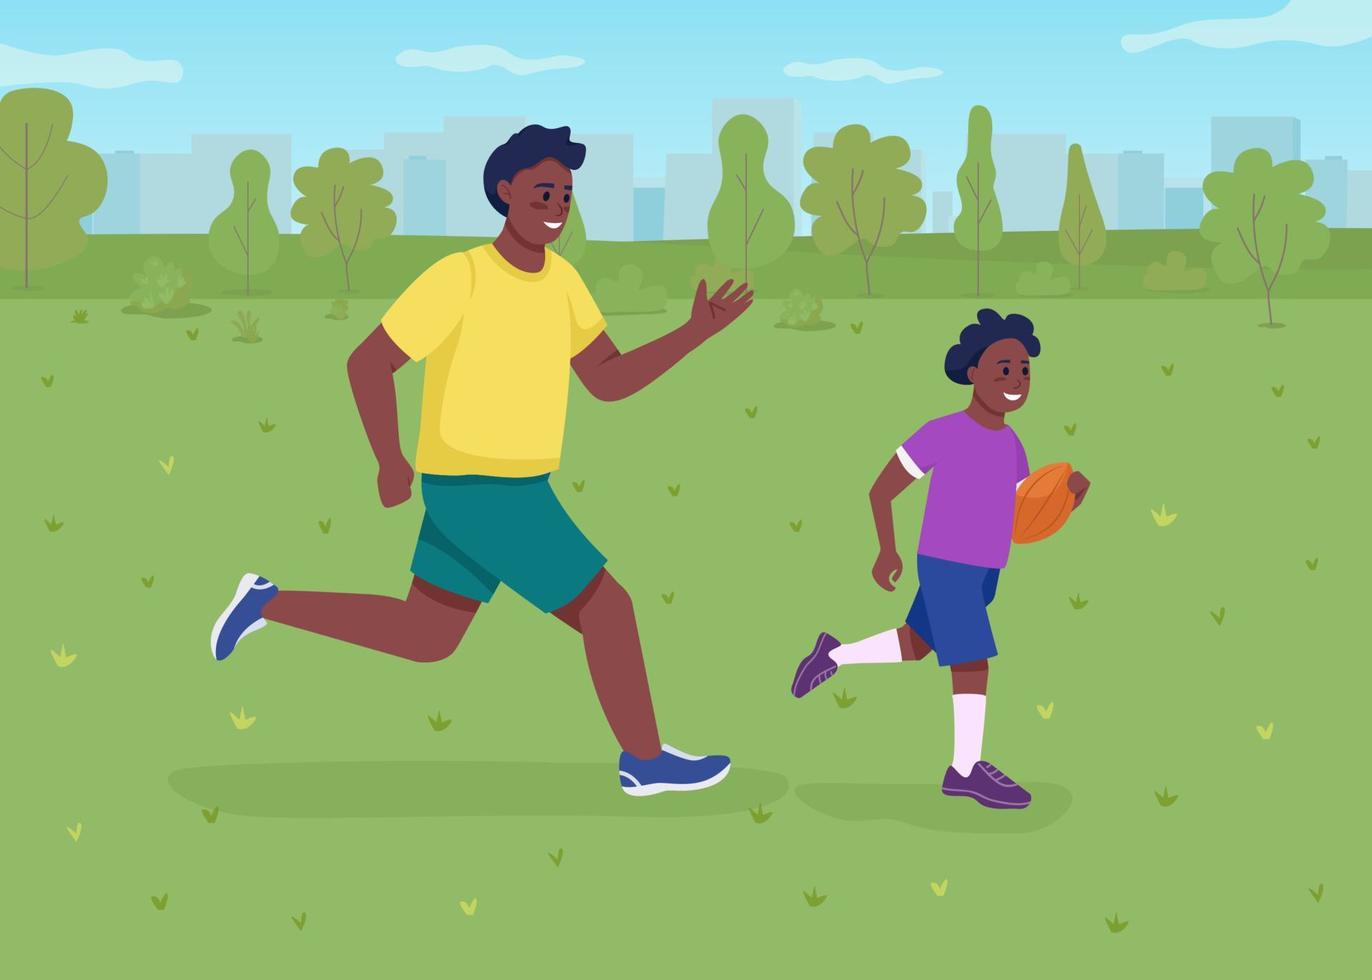 Playing american football with dad flat color vector illustration. Training camp. Running football trainer and kid. Smiling father and son 2D cartoon characters with green field on background